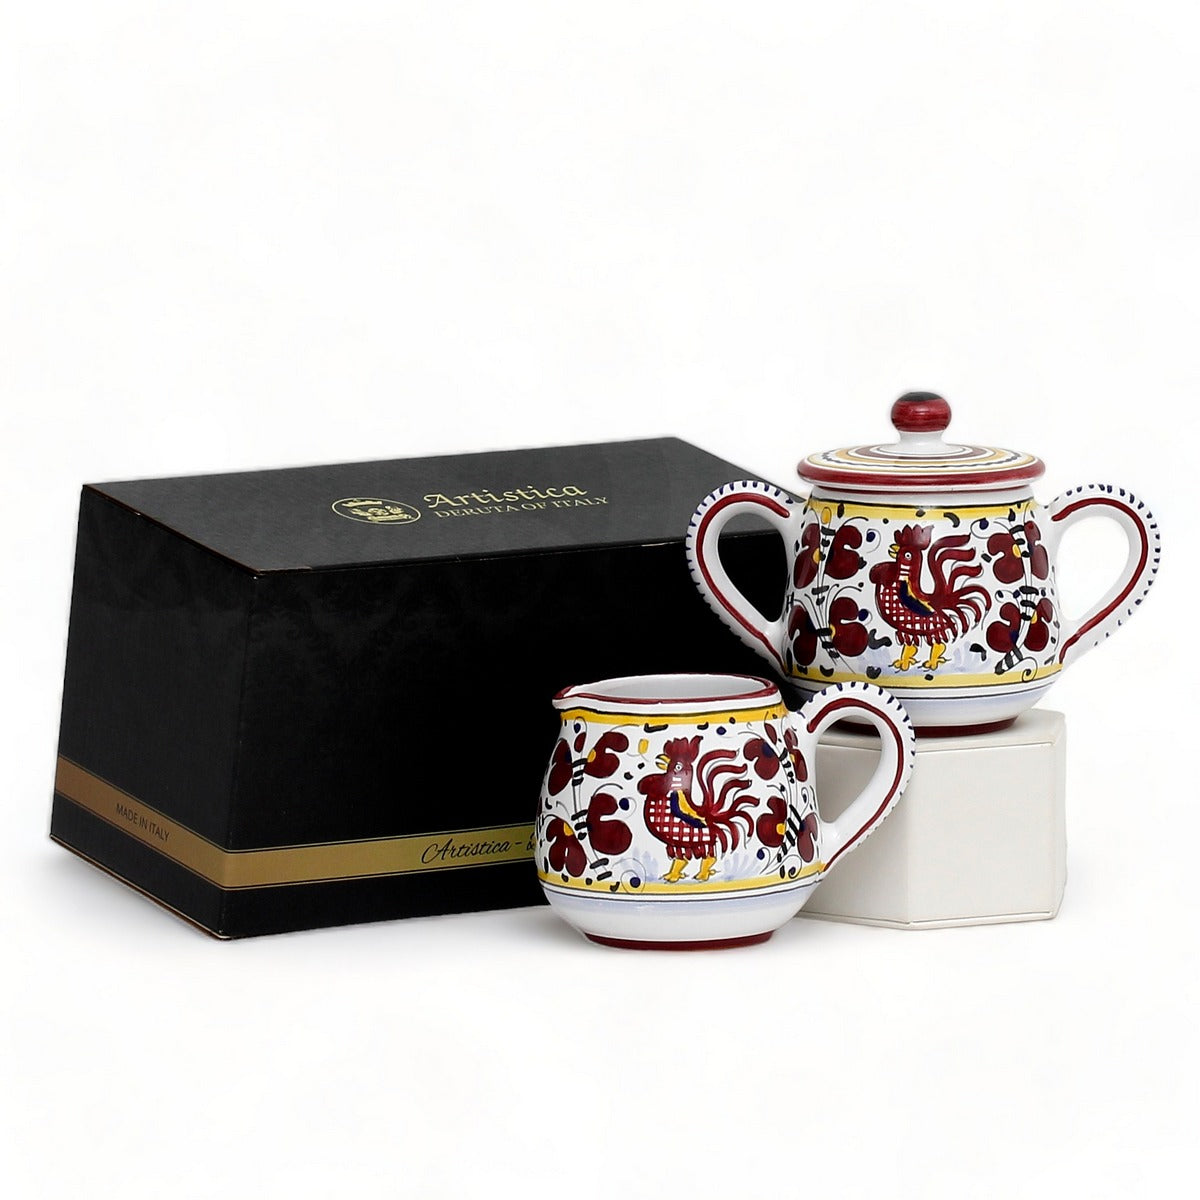 GIFT BOX: With authentic Deruta hand painted ceramic - Cream & Sugar Red Rooster Rooster design